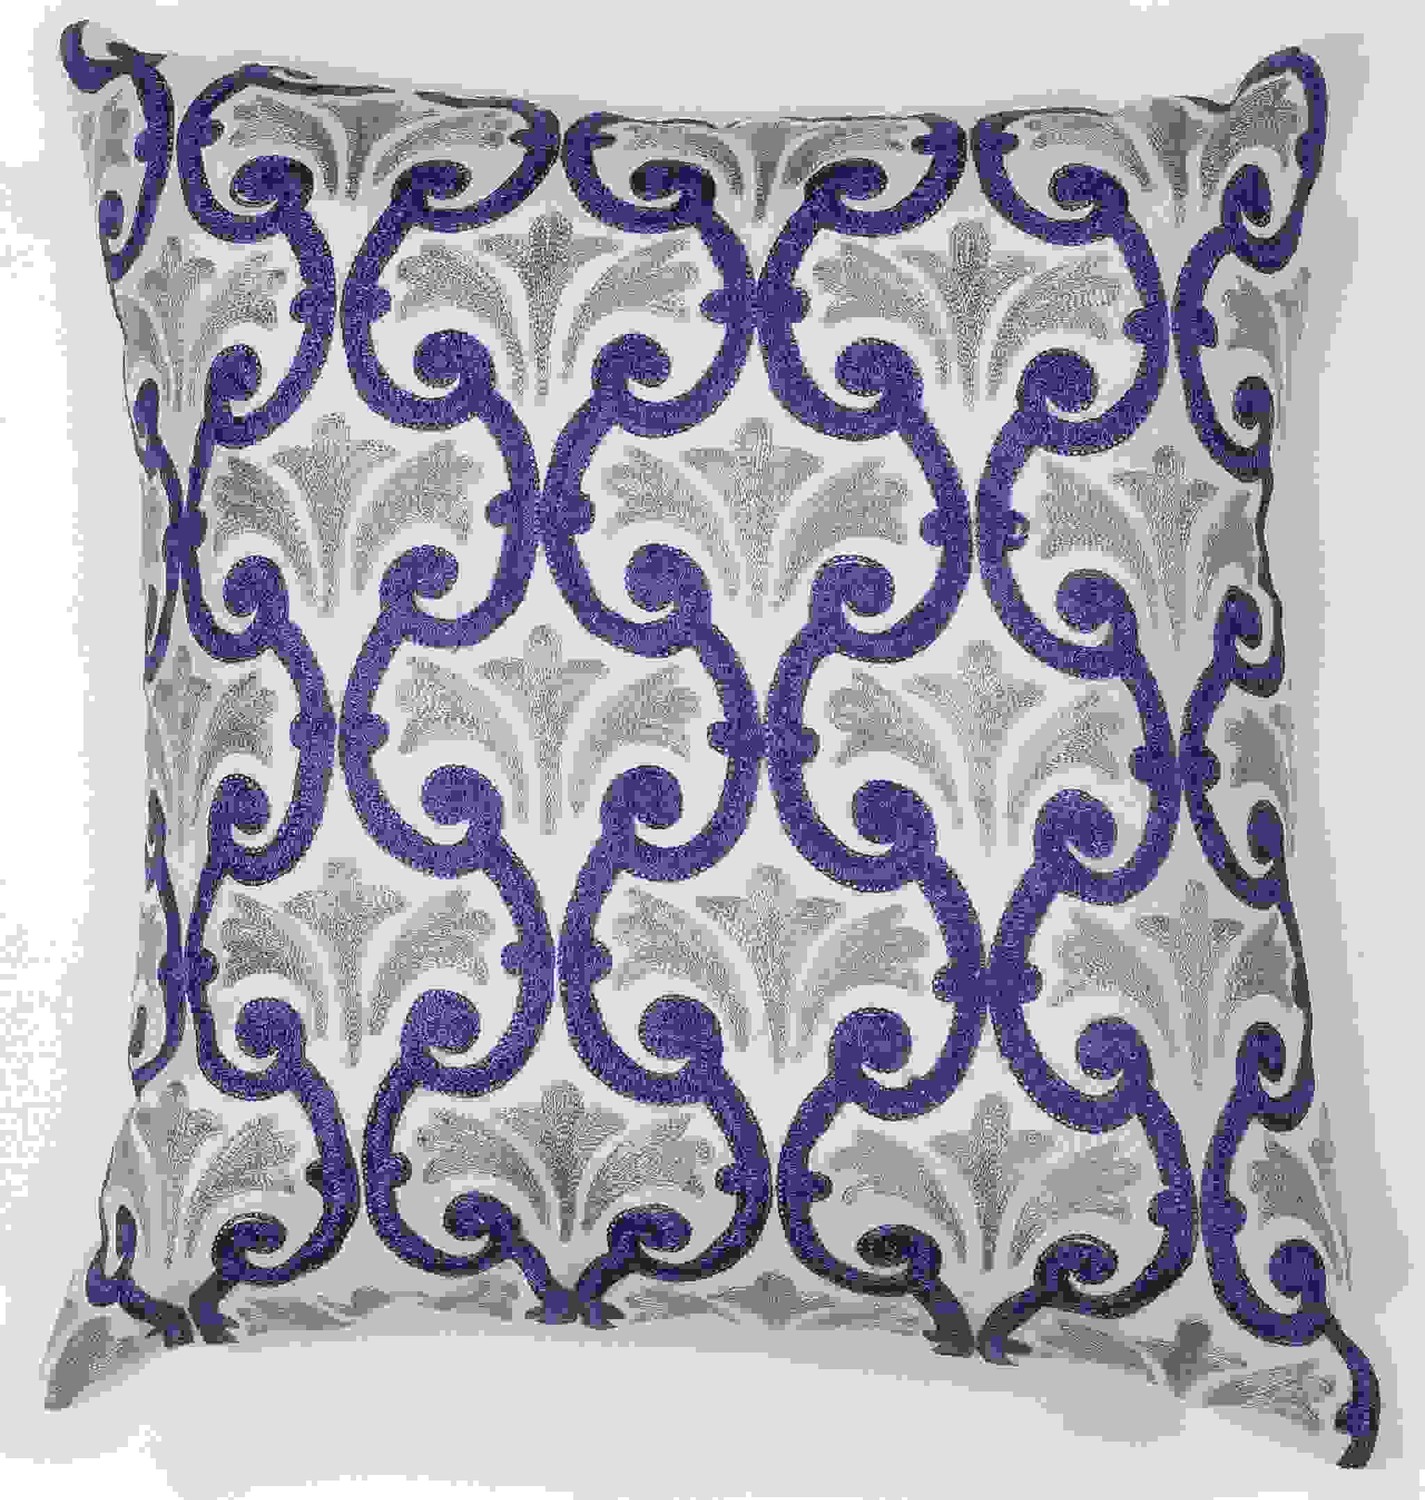 18" x 18" Cotton Ivory or Blue Pillow